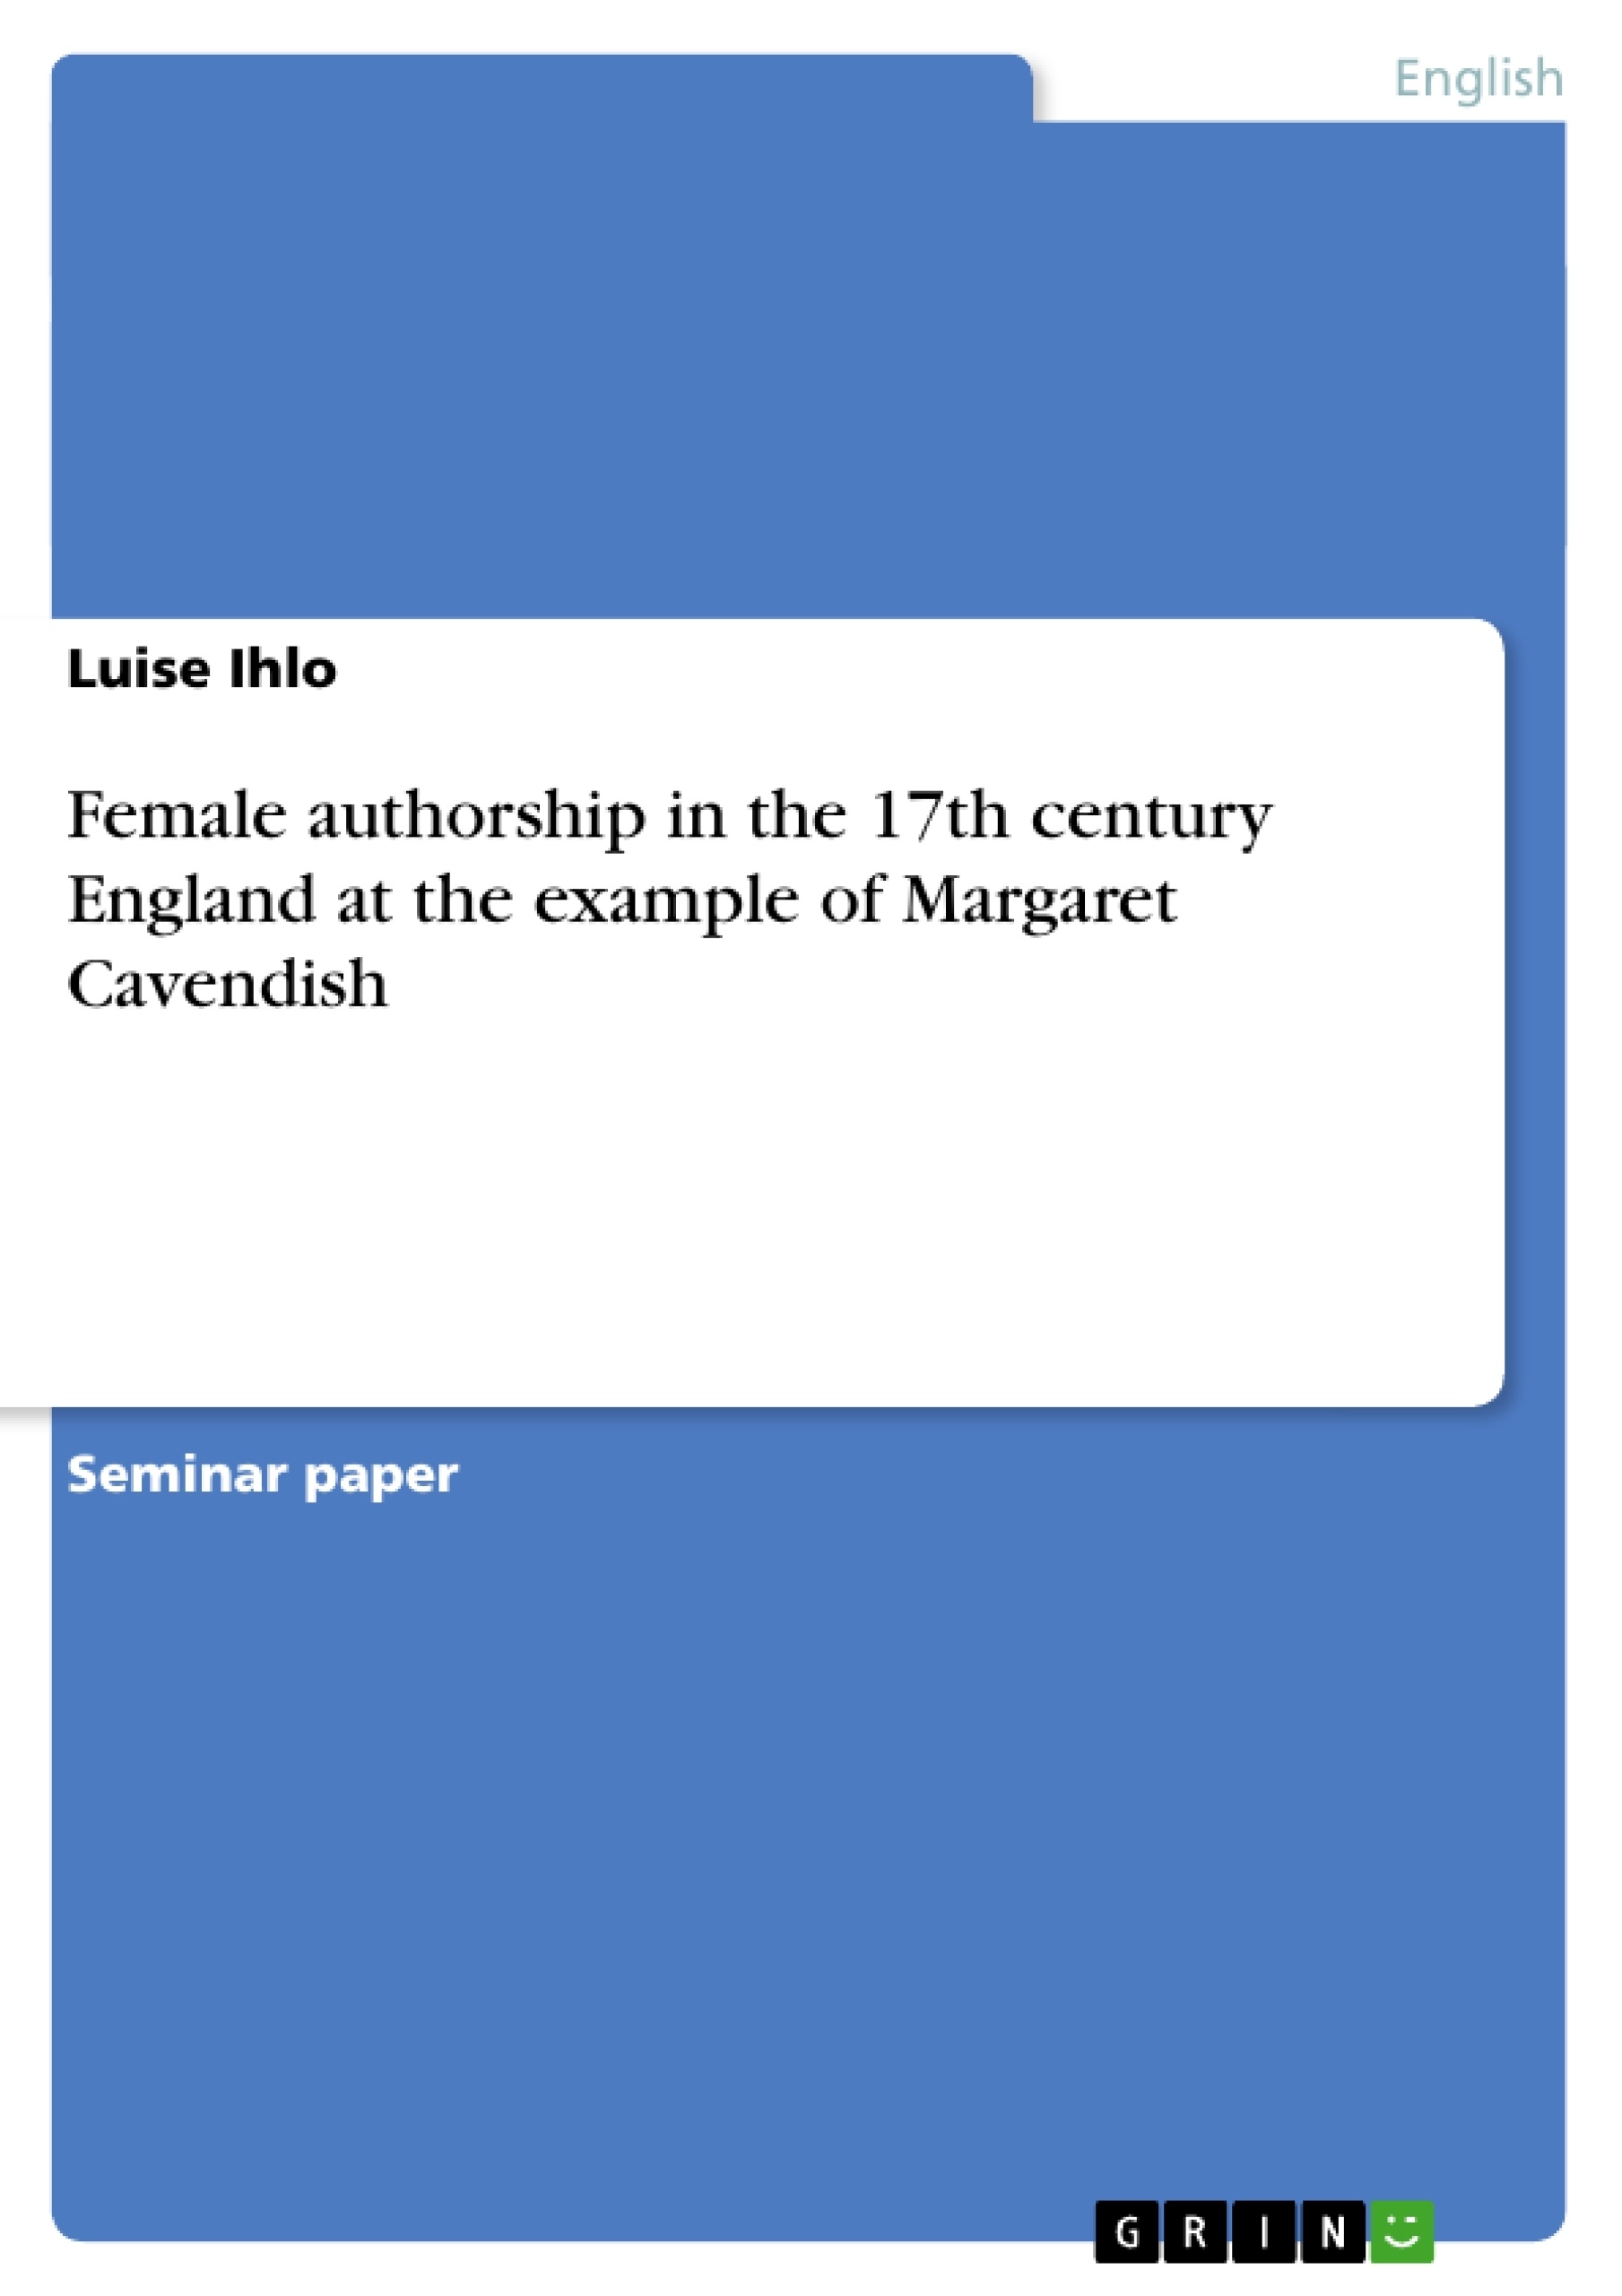 Título: Female authorship in the 17th century England at the example of Margaret Cavendish